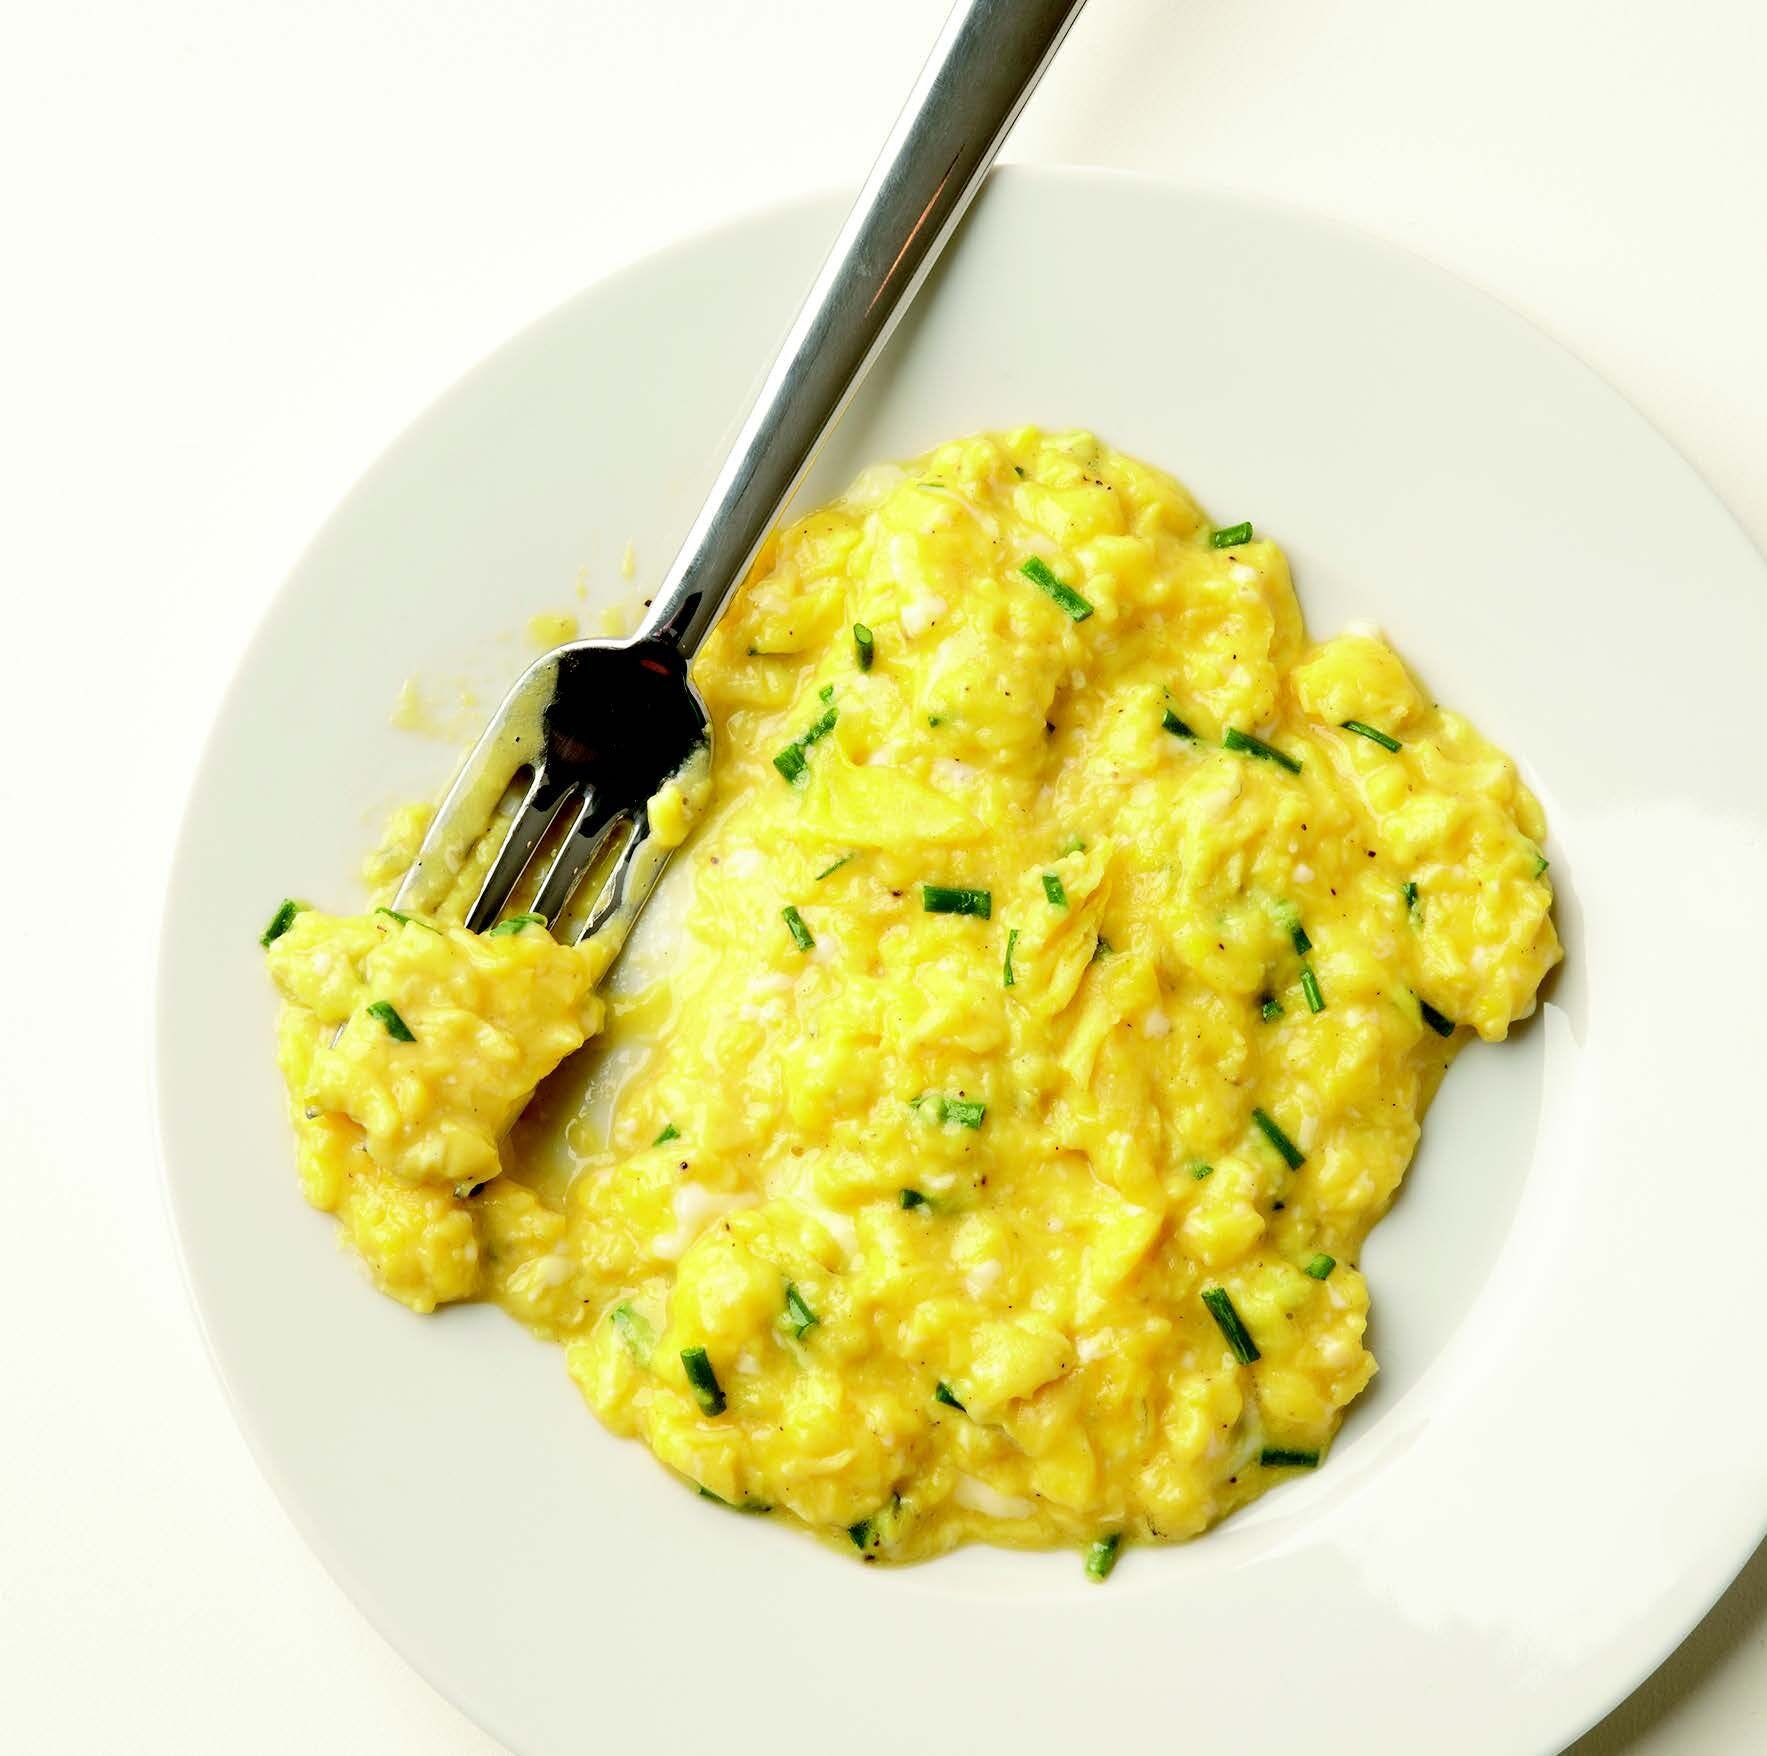 11 Things To Add To Scrambled Eggs By Mark Bittman Heated